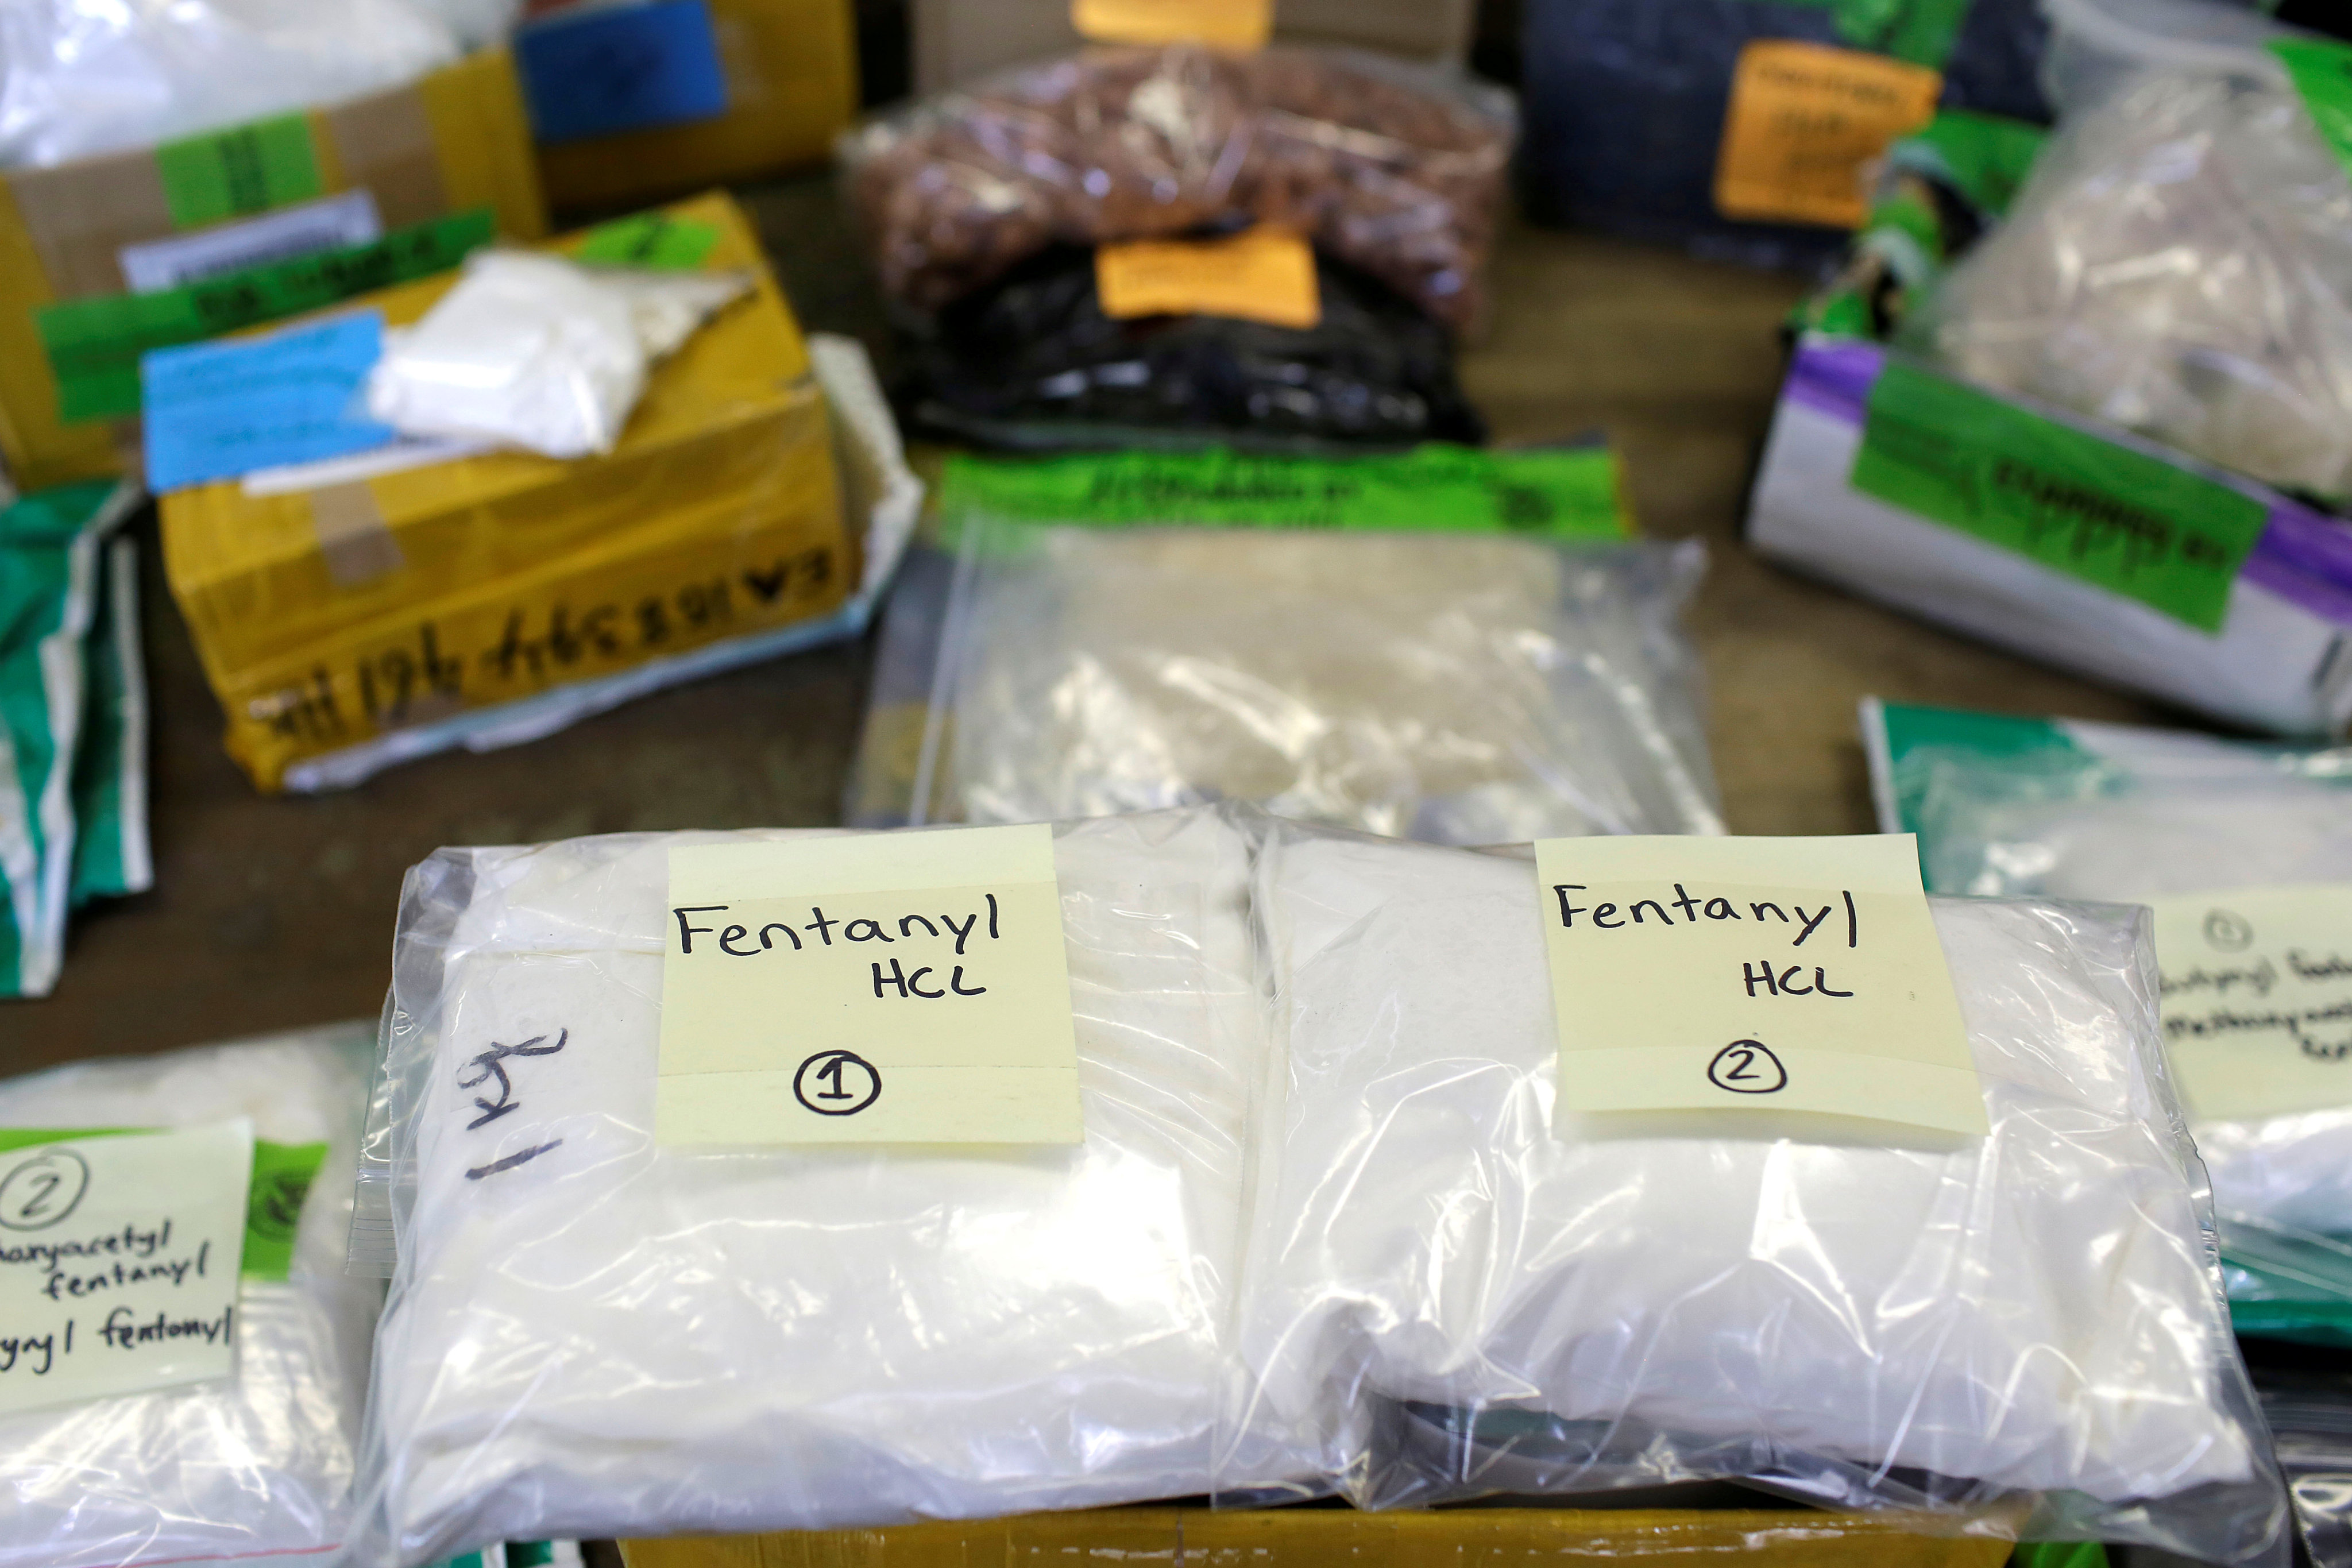 Plastic bags of fentanyl seized by US customs officials are seen in this file photo. The Royal Malaysian Customs Department said this month’s fentanyl seizure was its first ever. Photo: Reuters